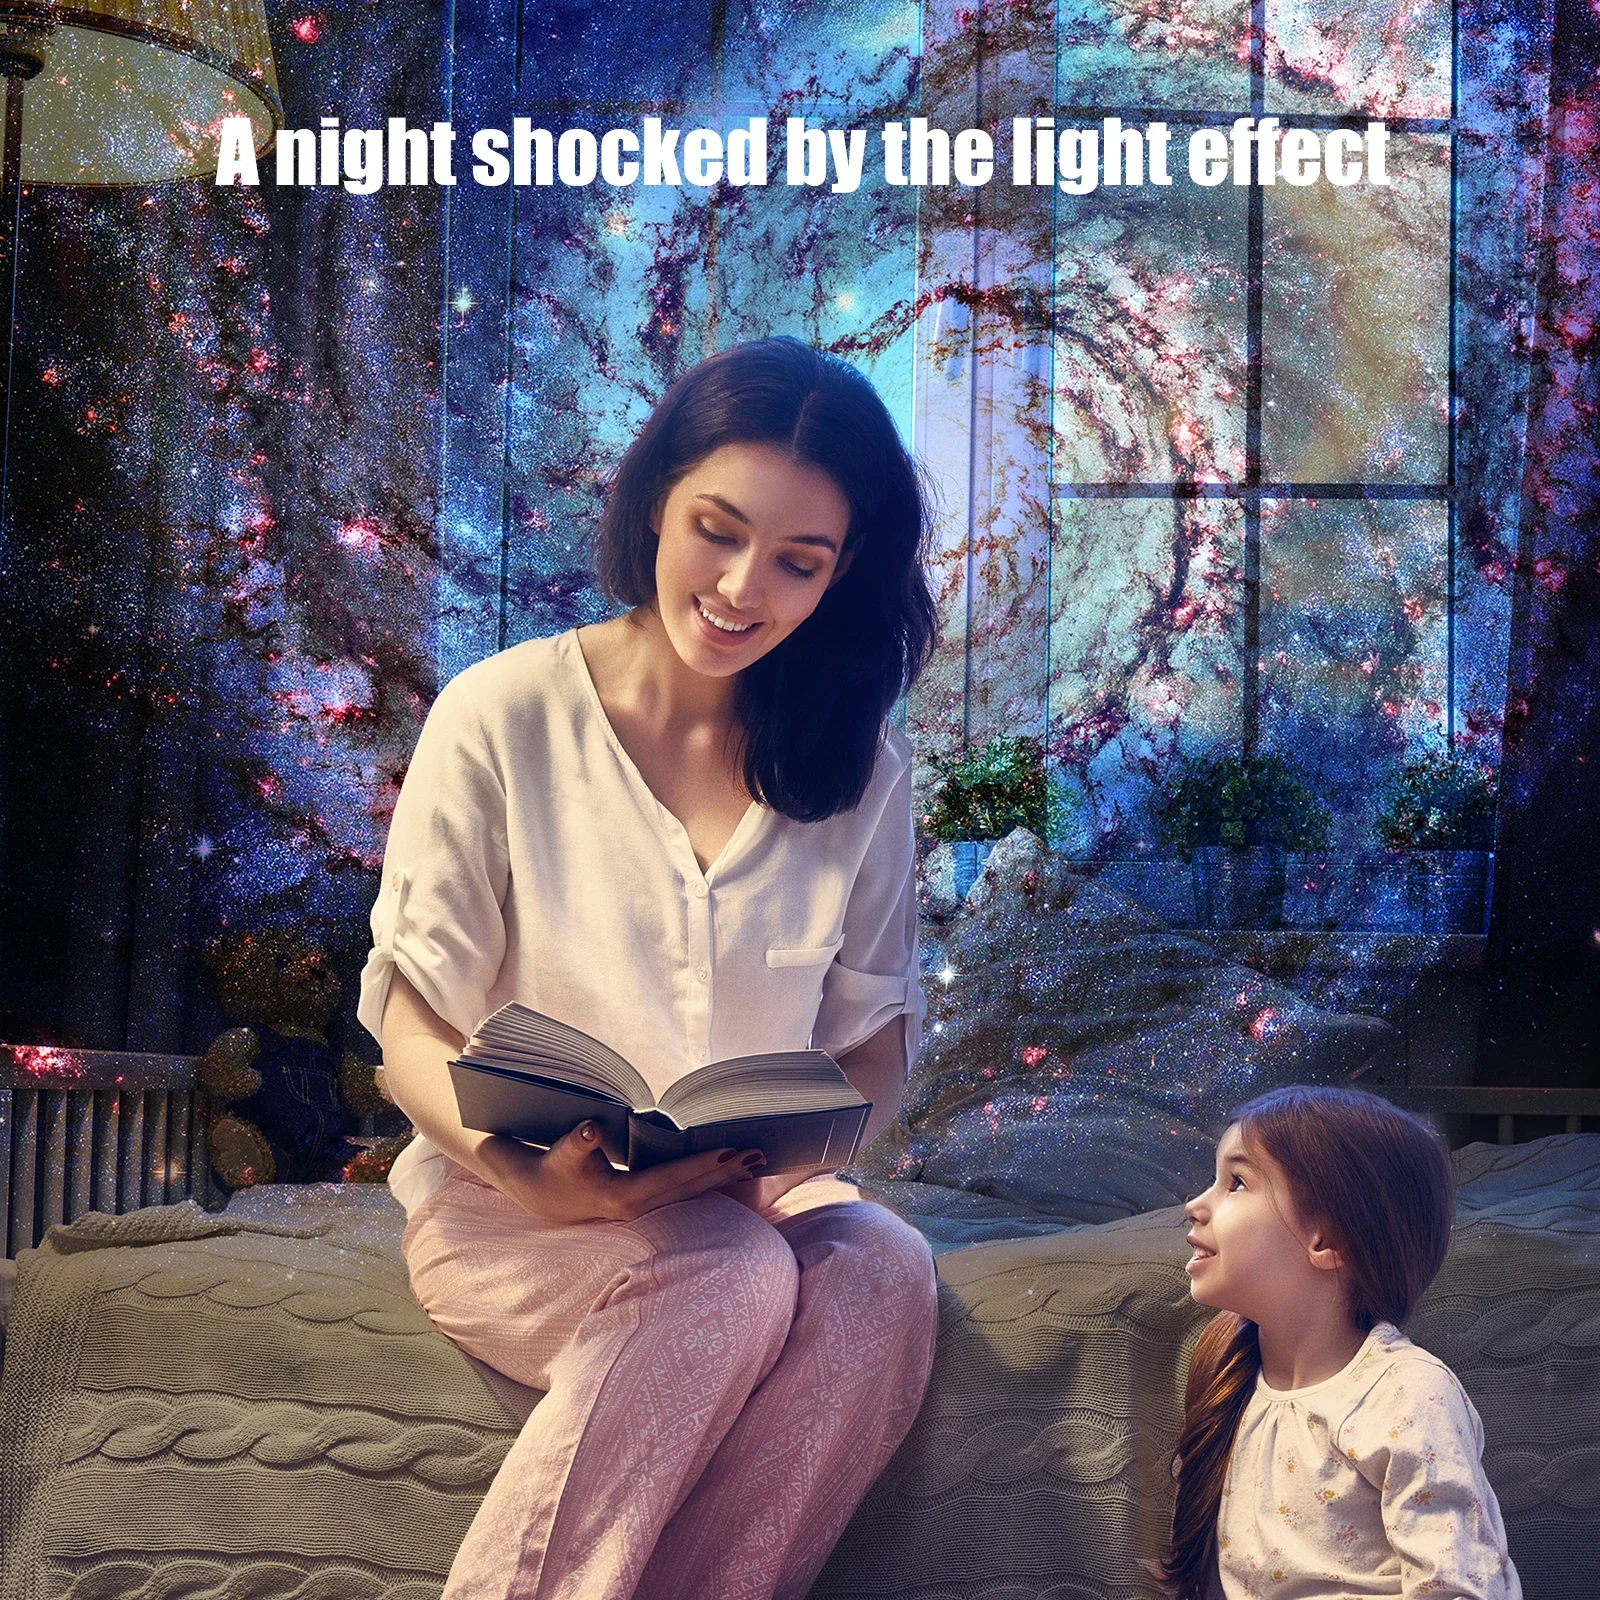 AKIMID Pickup Starry Night Projection Lamp Starry Night Top Ambient Light Bedroom Kids HD Focus Full Sky Stars